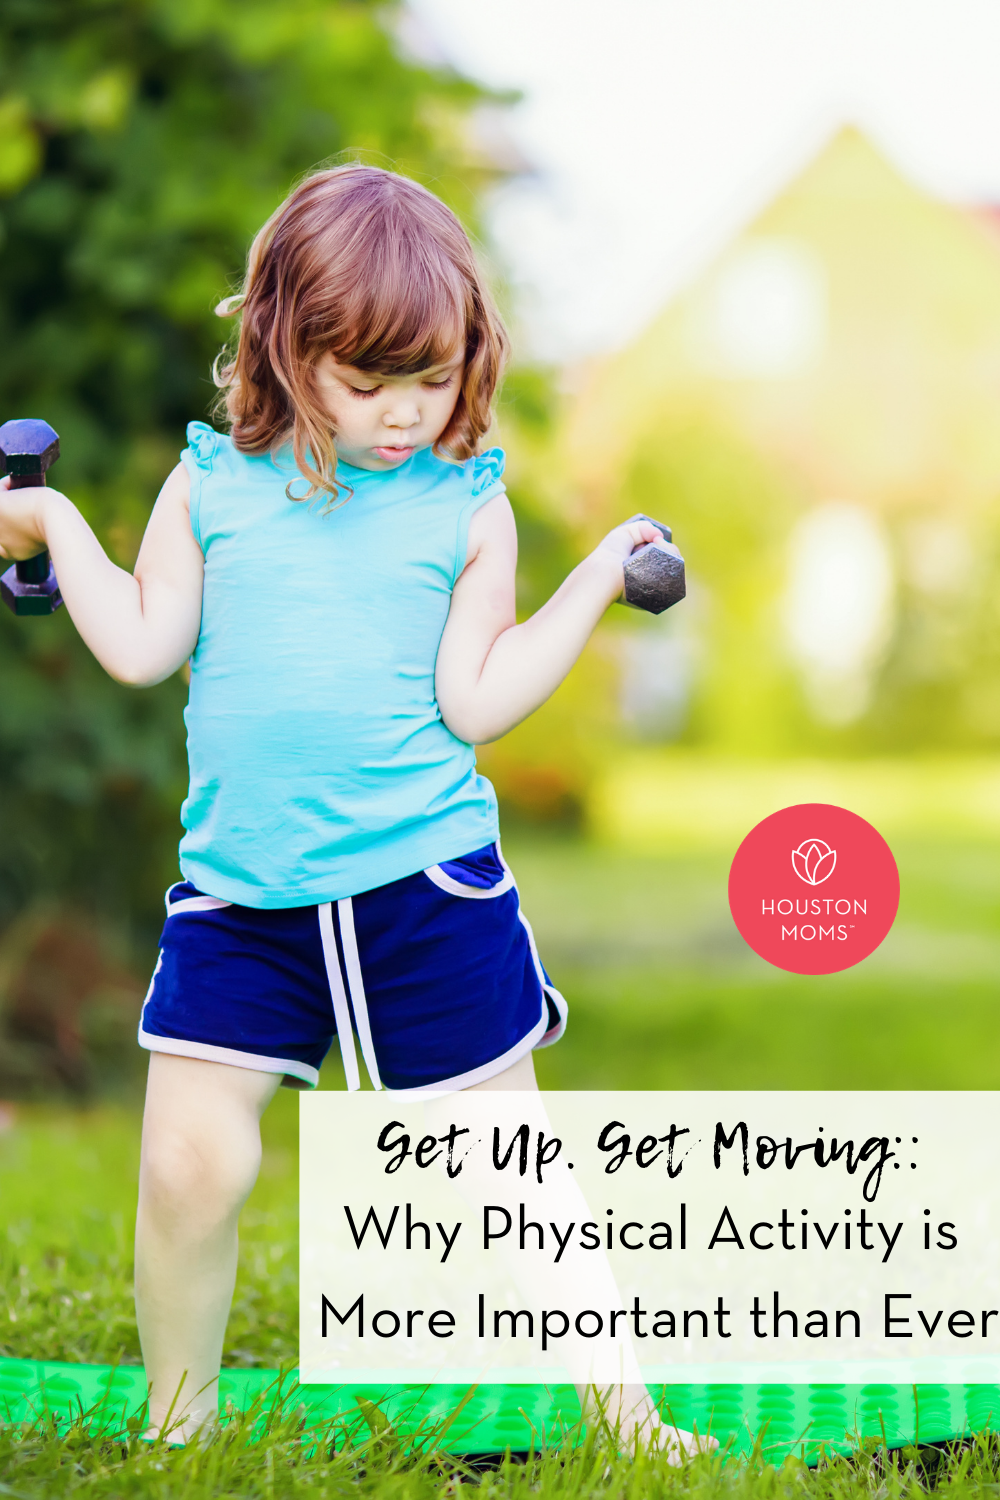 Houston Moms "Get Up. Get Moving:: Why Physical Activity is More Important than Ever" #houstonmoms #houstonmomsblog #momsaroundhouston